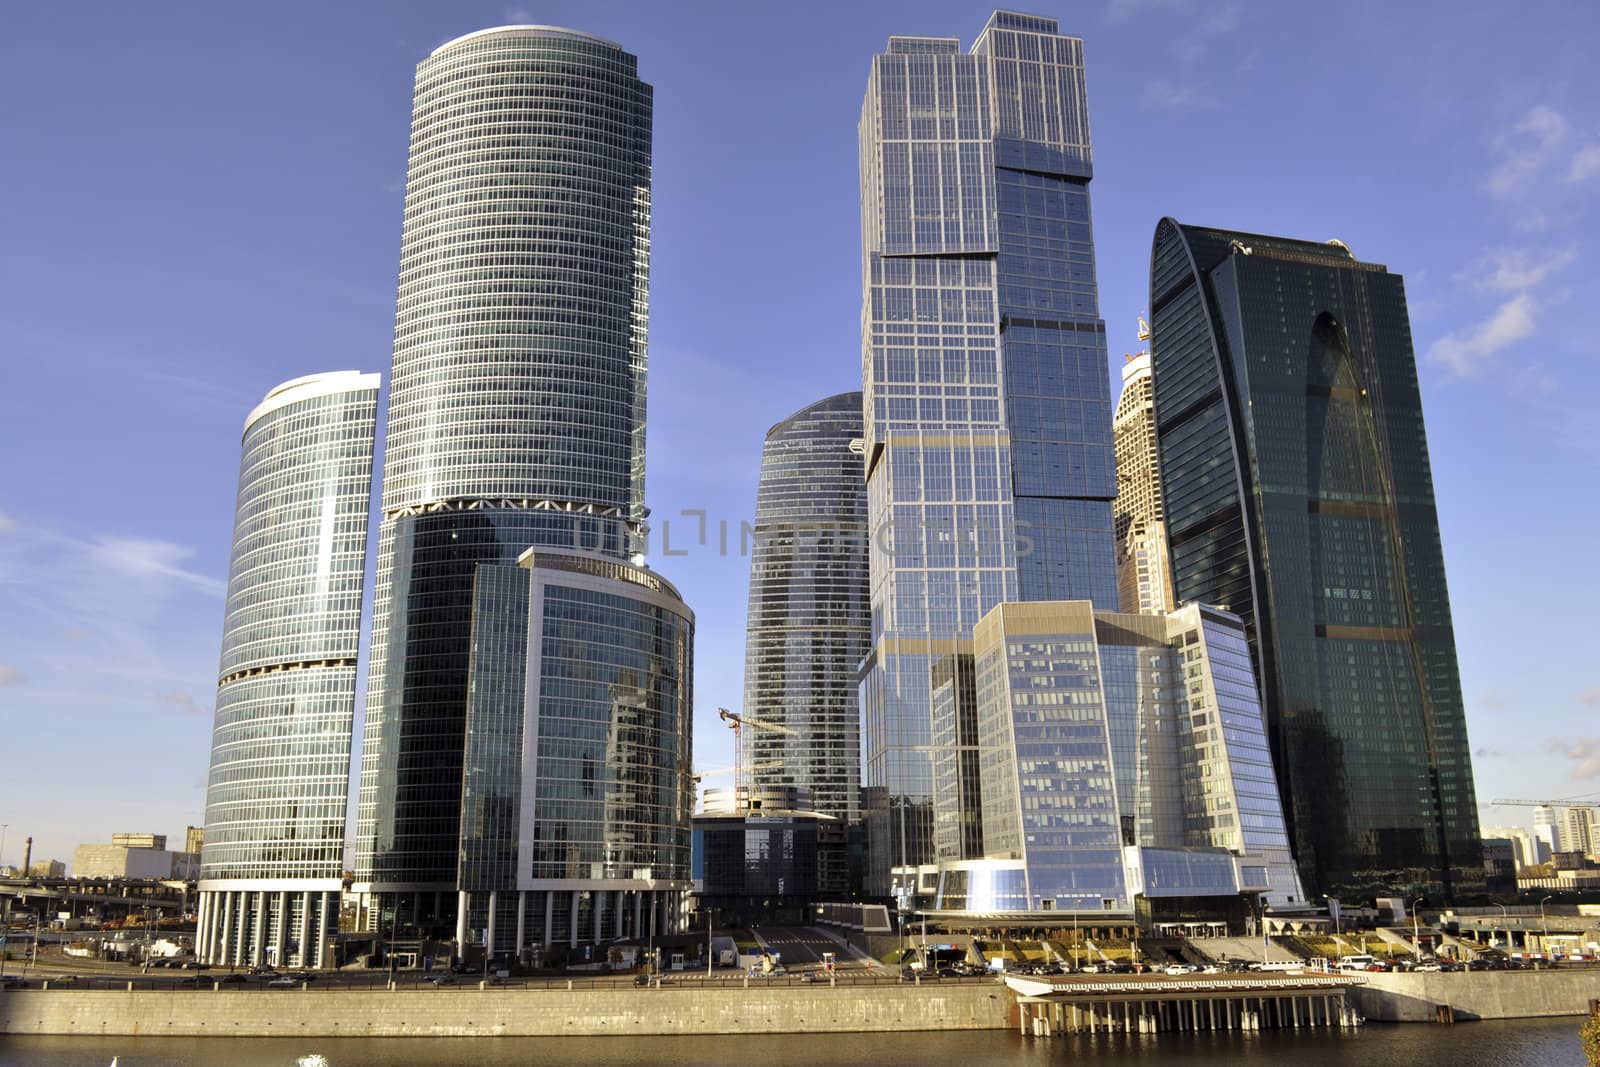 Moscow International Business Center by daytime at bright sunny weather